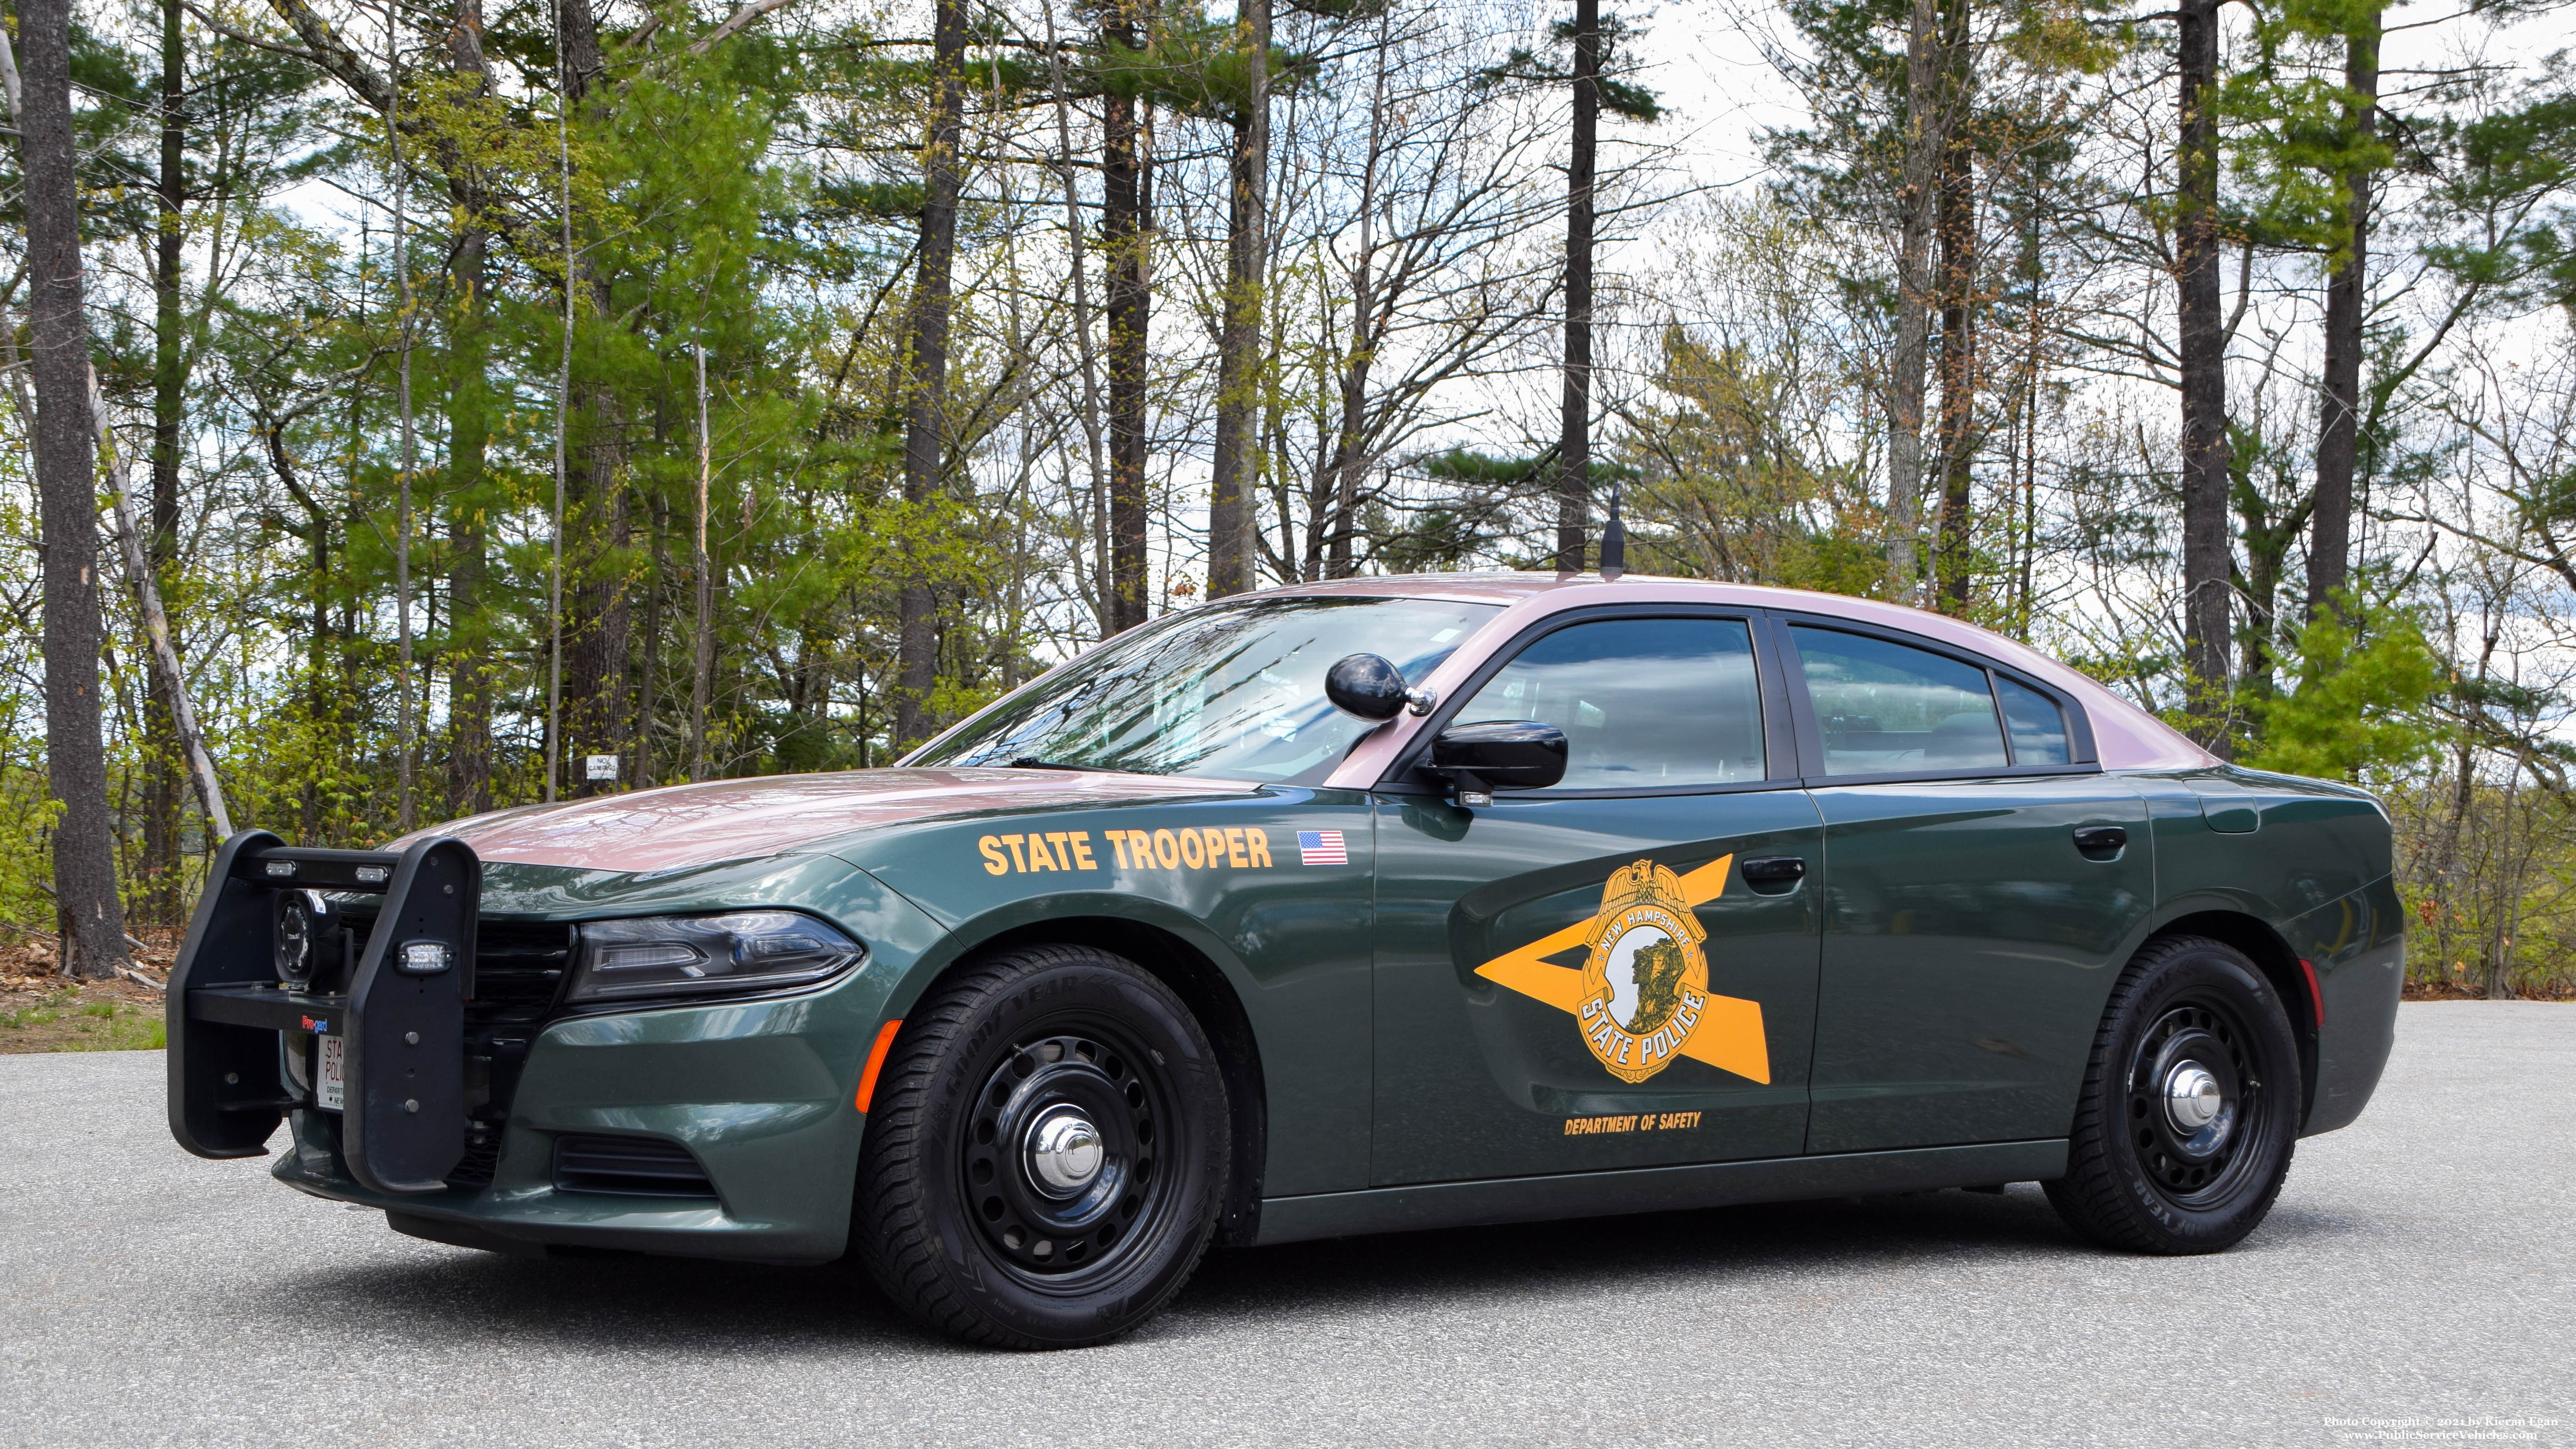 A photo  of New Hampshire State Police
            Cruiser 402, a 2015-2019 Dodge Charger             taken by Kieran Egan